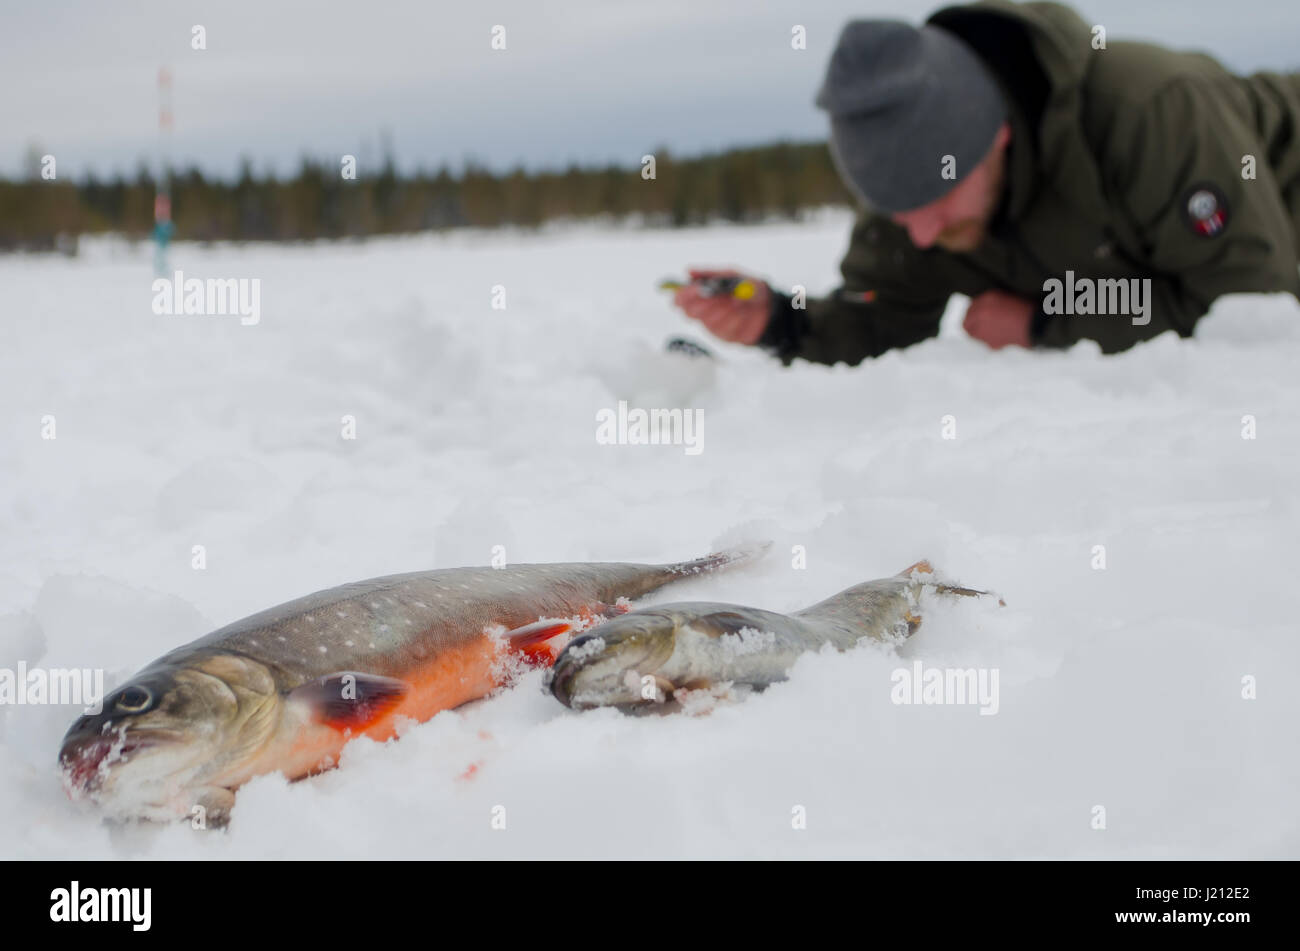 Artic char and brown trout in foreground with man lying on the ice fishing in background Stock Photo